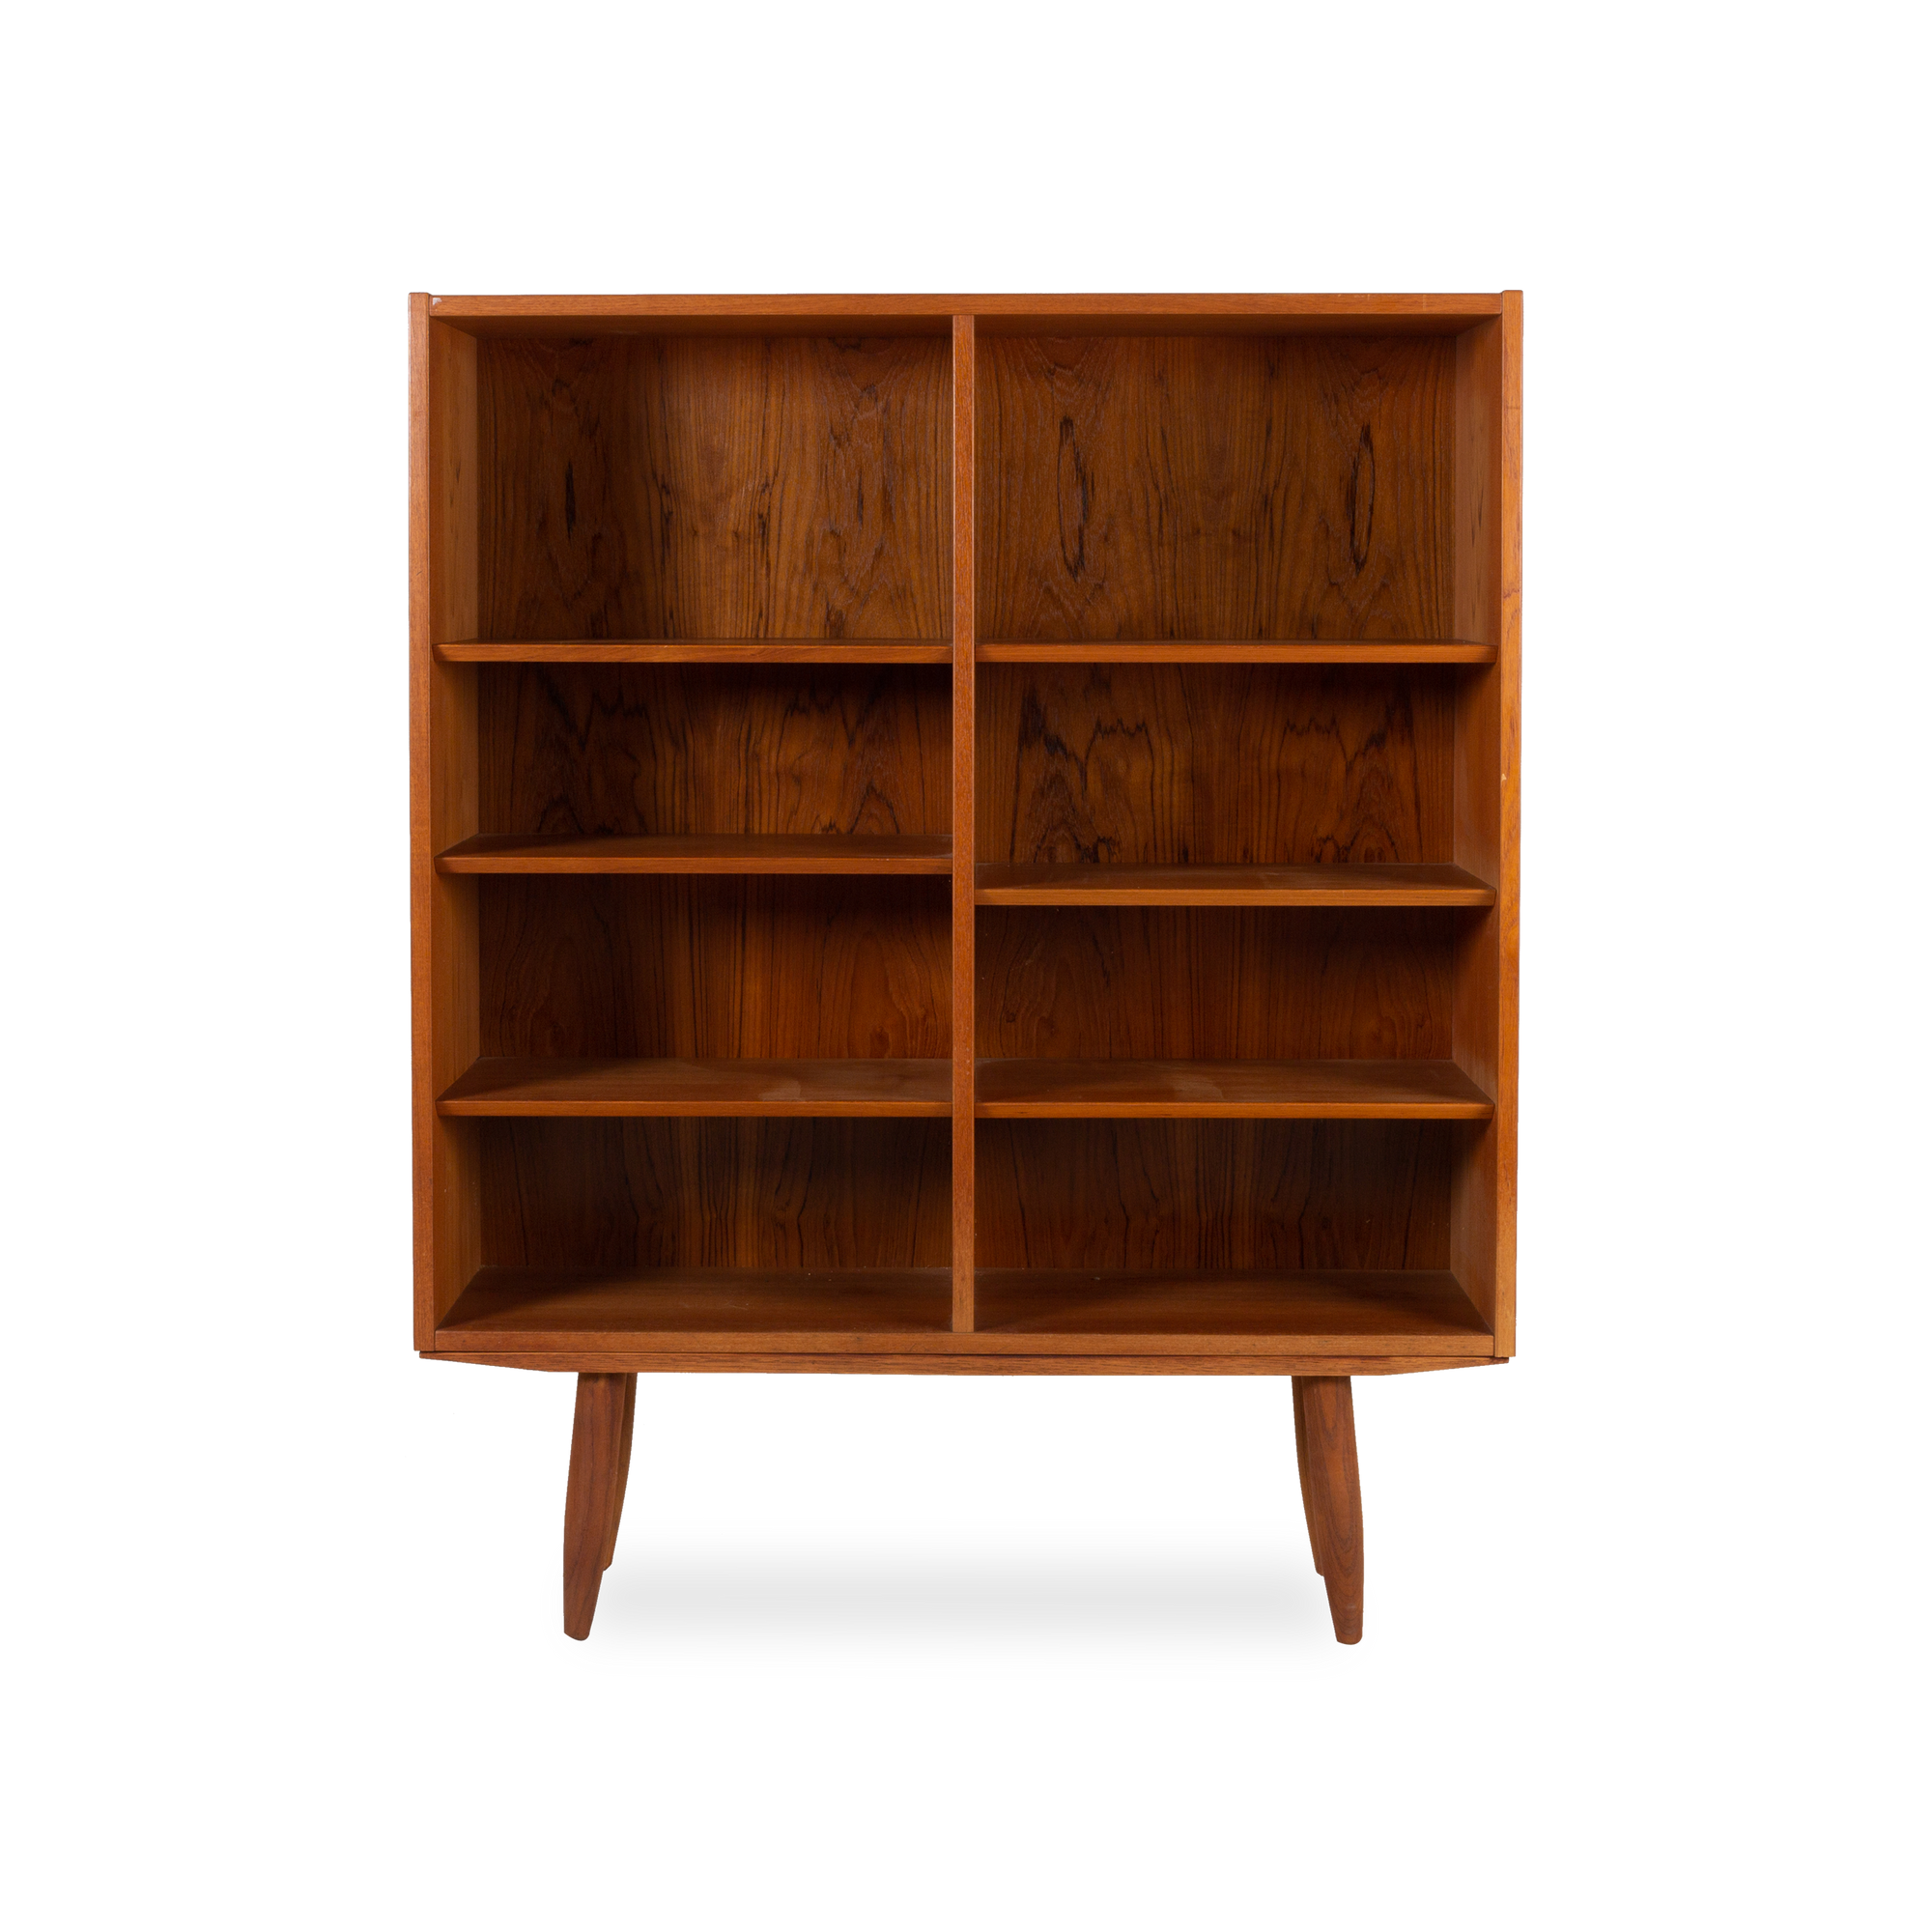 A stunning display of aged wood, this vintage bookcase was designed by  Poul Hundevad and produced by Hundevad Mobelfabrik, Denmark.